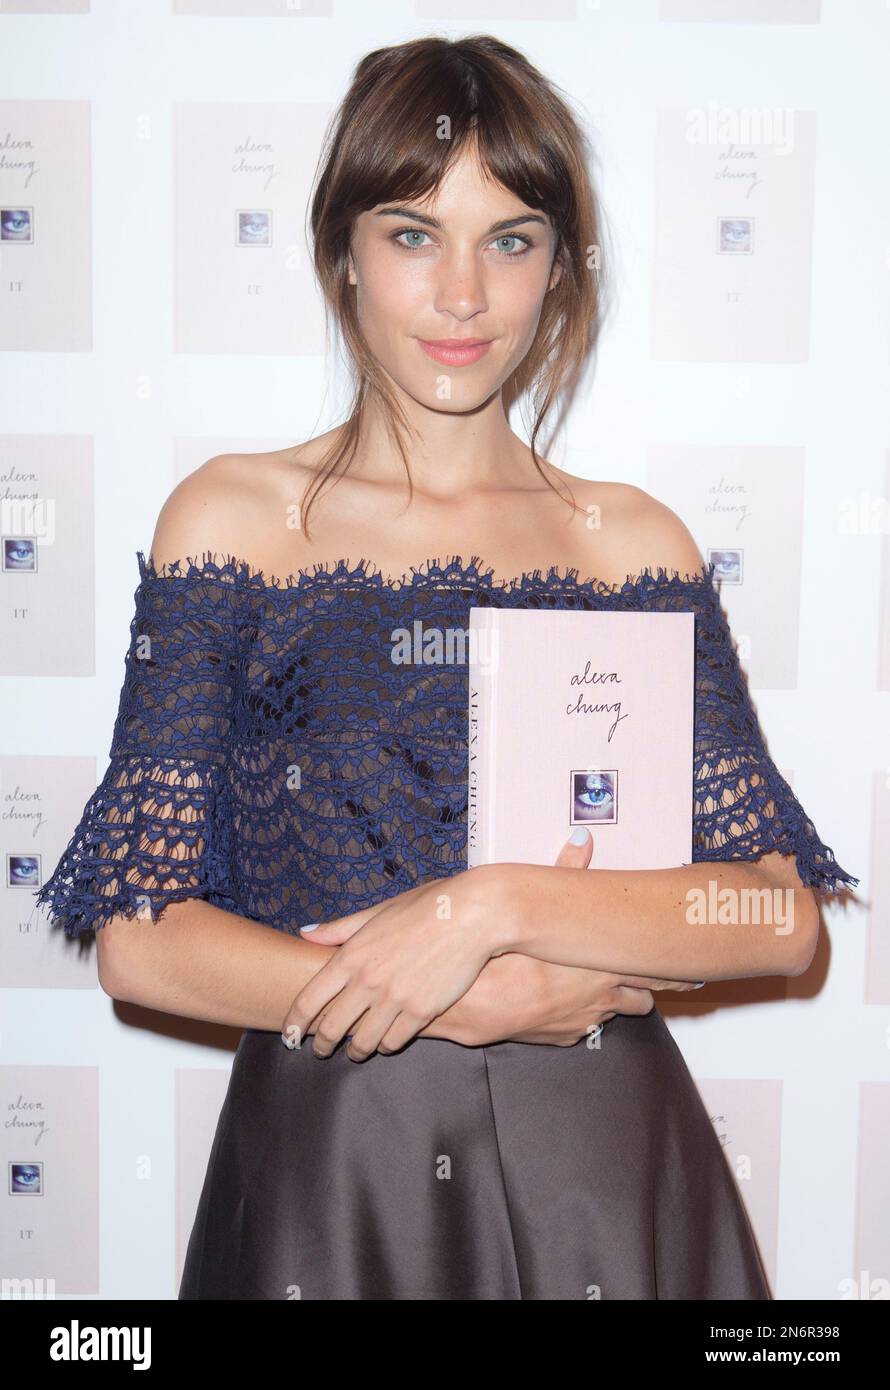 British Model and TV presenter Alexa Chung launches her book, which  combines her writing with personal drawings, sketches and photographs, at a  book launch event in Liberty, central London, Wednesday, Sept 4,